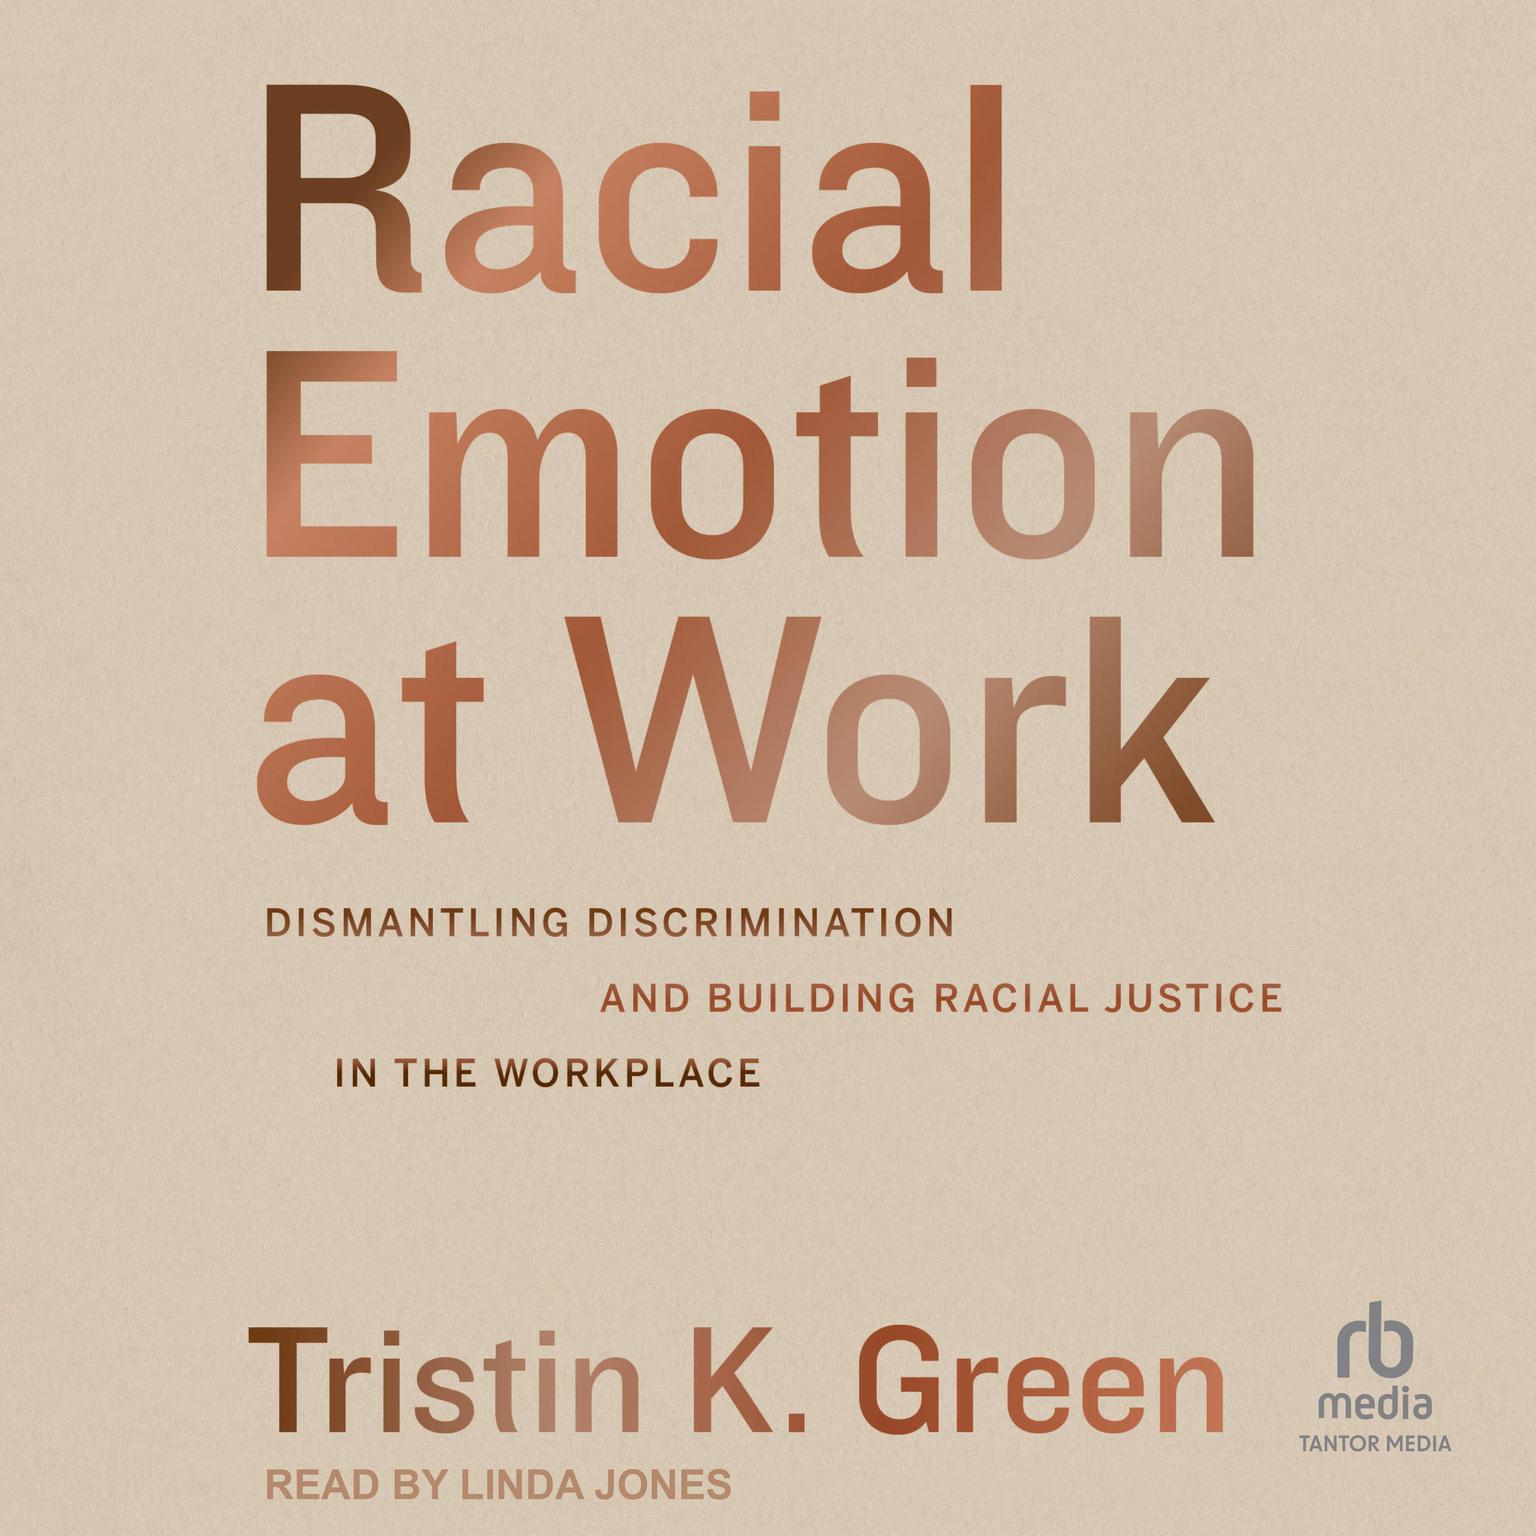 Racial Emotion at Work: Dismantling Discrimination and Building Racial Justice in the Workplace Audiobook, by Tristin K. Green